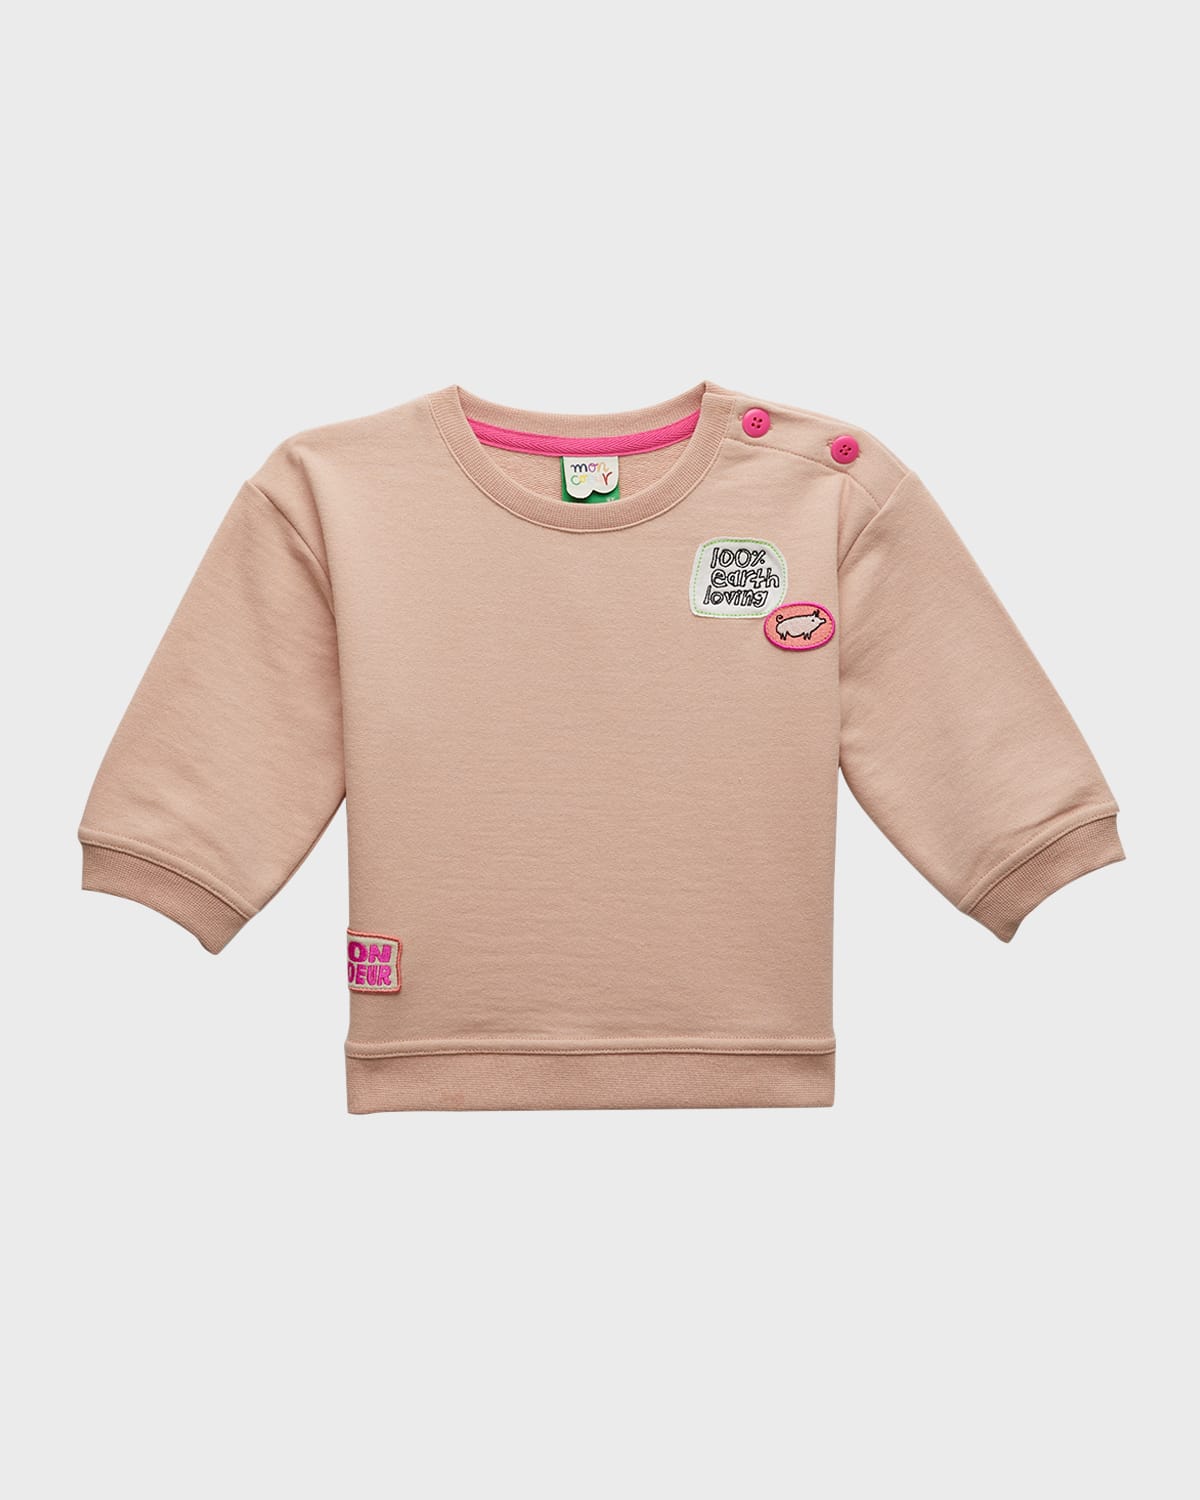 Mon Coeur Kids' Girl's Recycled Patches Embroidered Sweatshirt In Chalk Pink